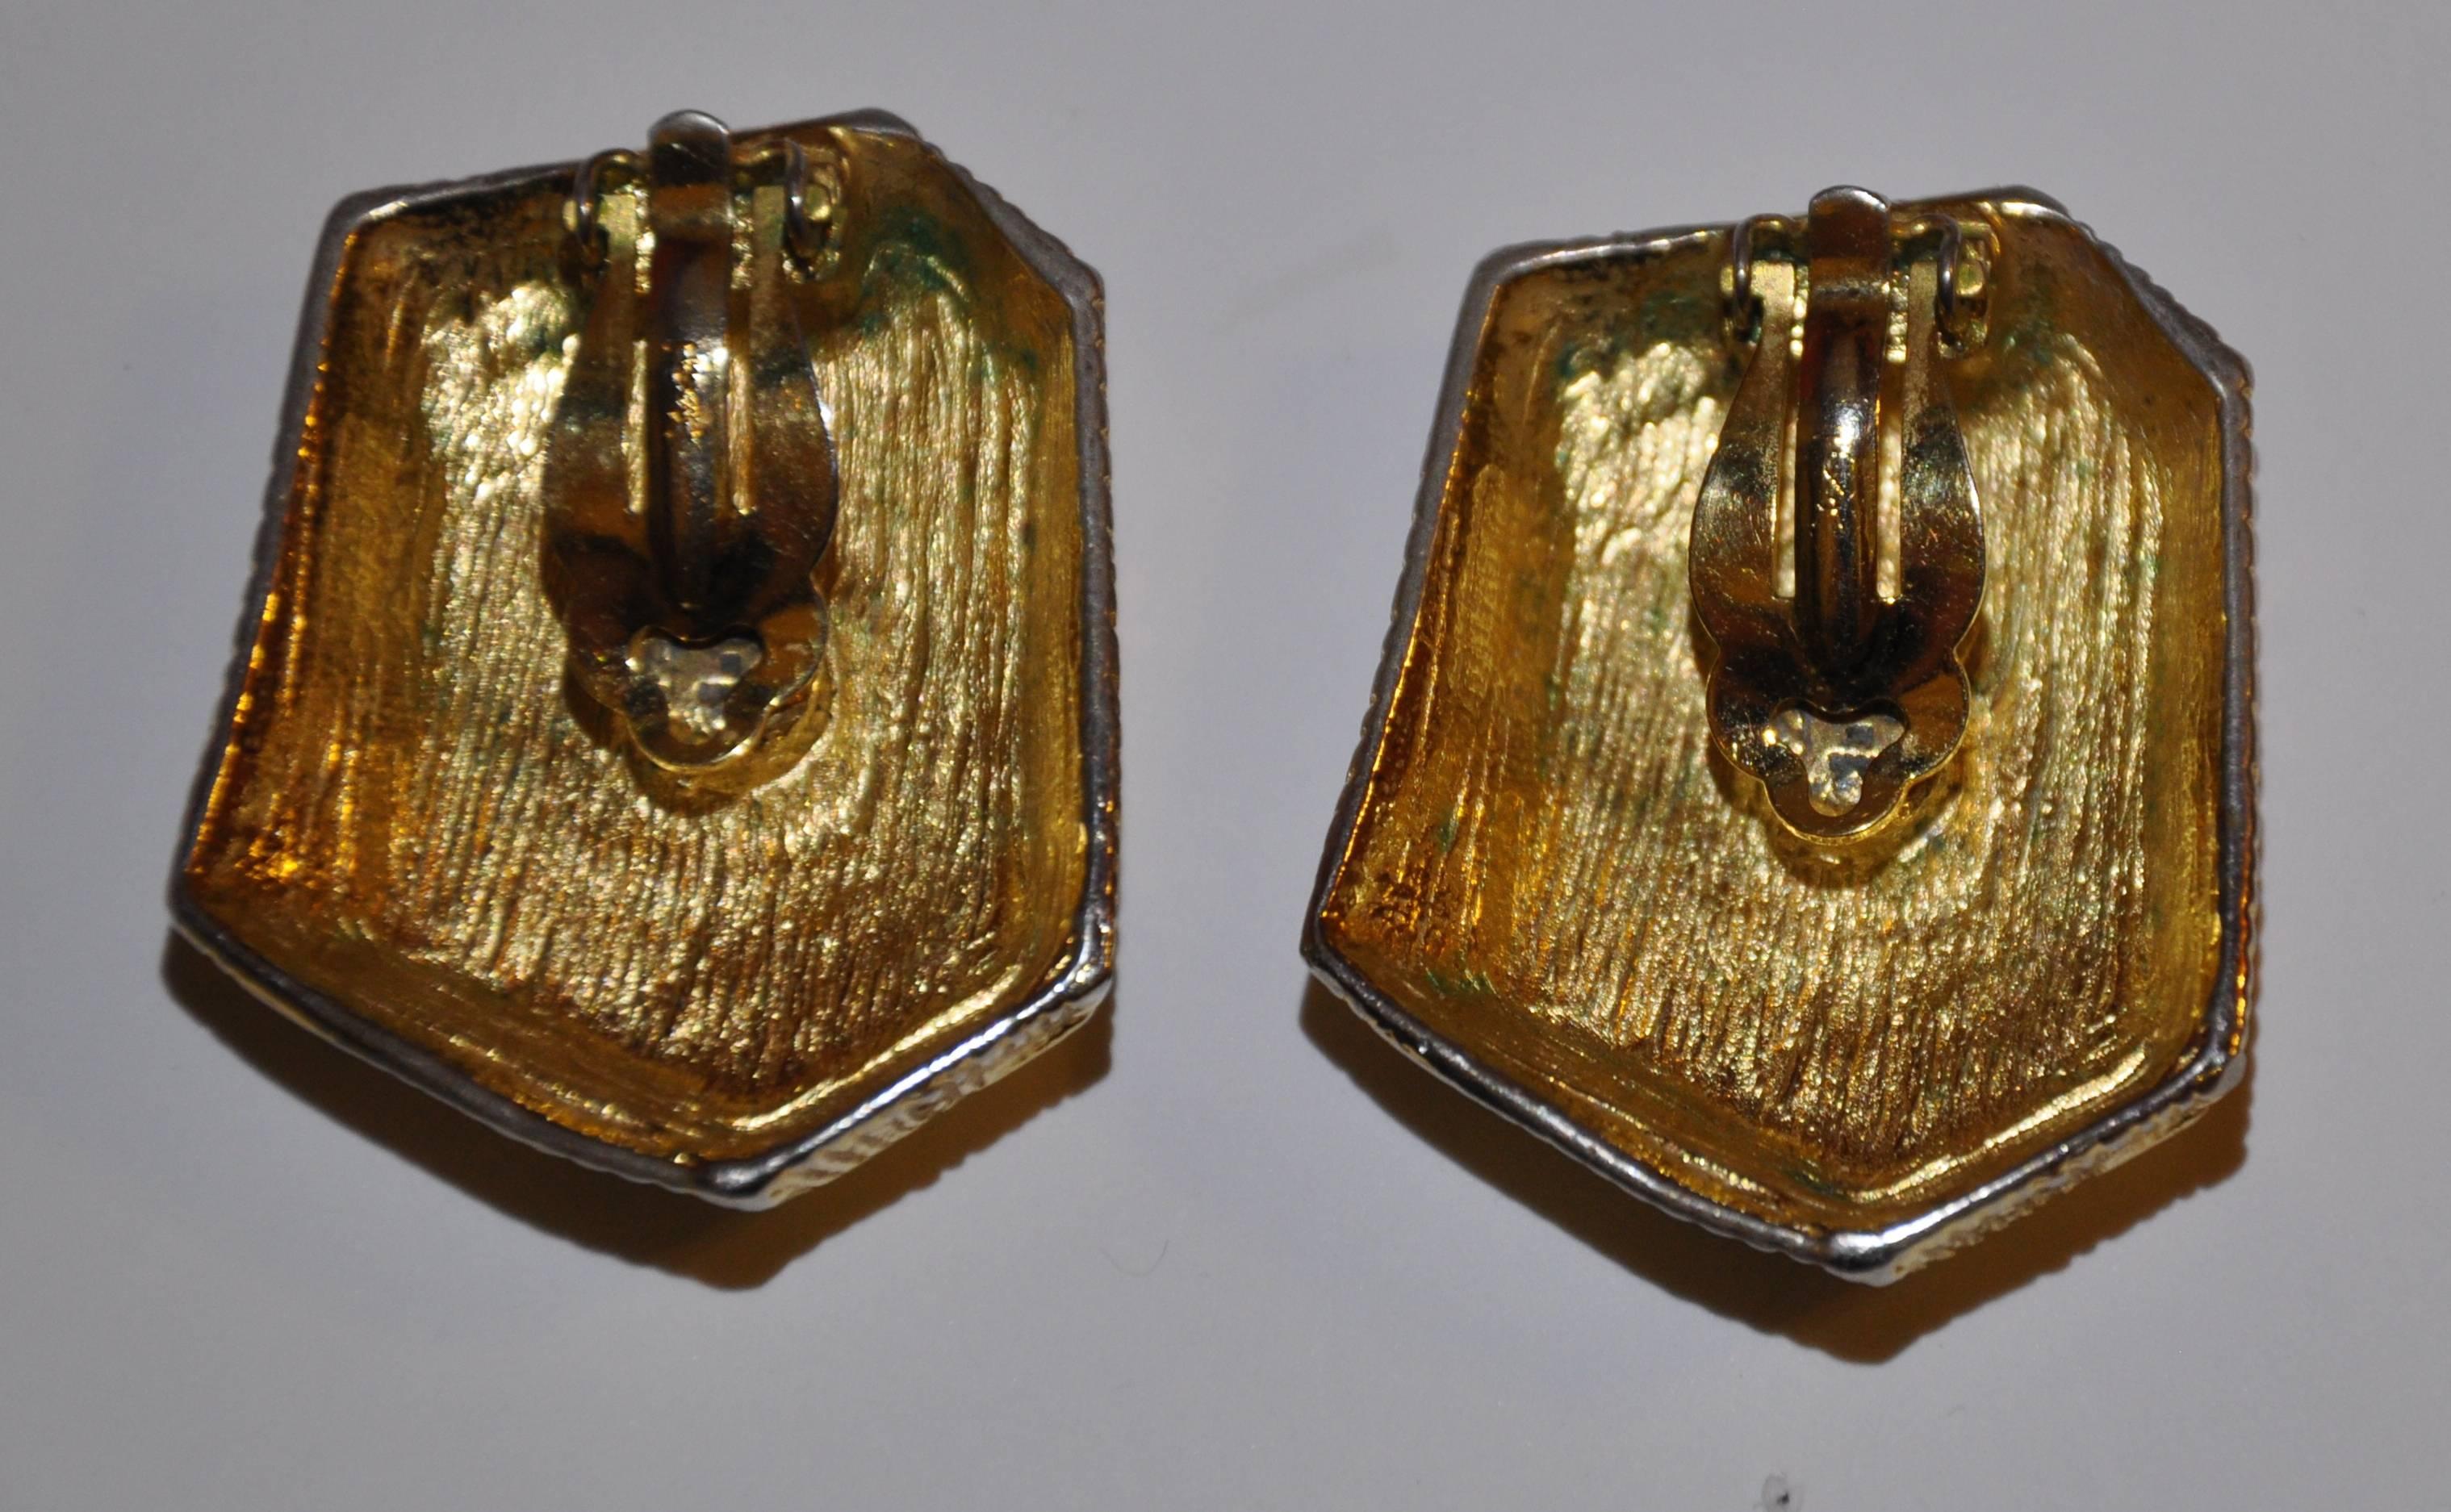       Yves Saint Laurent large Abstract shape clip on earrings measures 1 5/8" in height, 1 1/8" in width and 3/8" in depth, The signature YSL is engraved on the back, made in France.